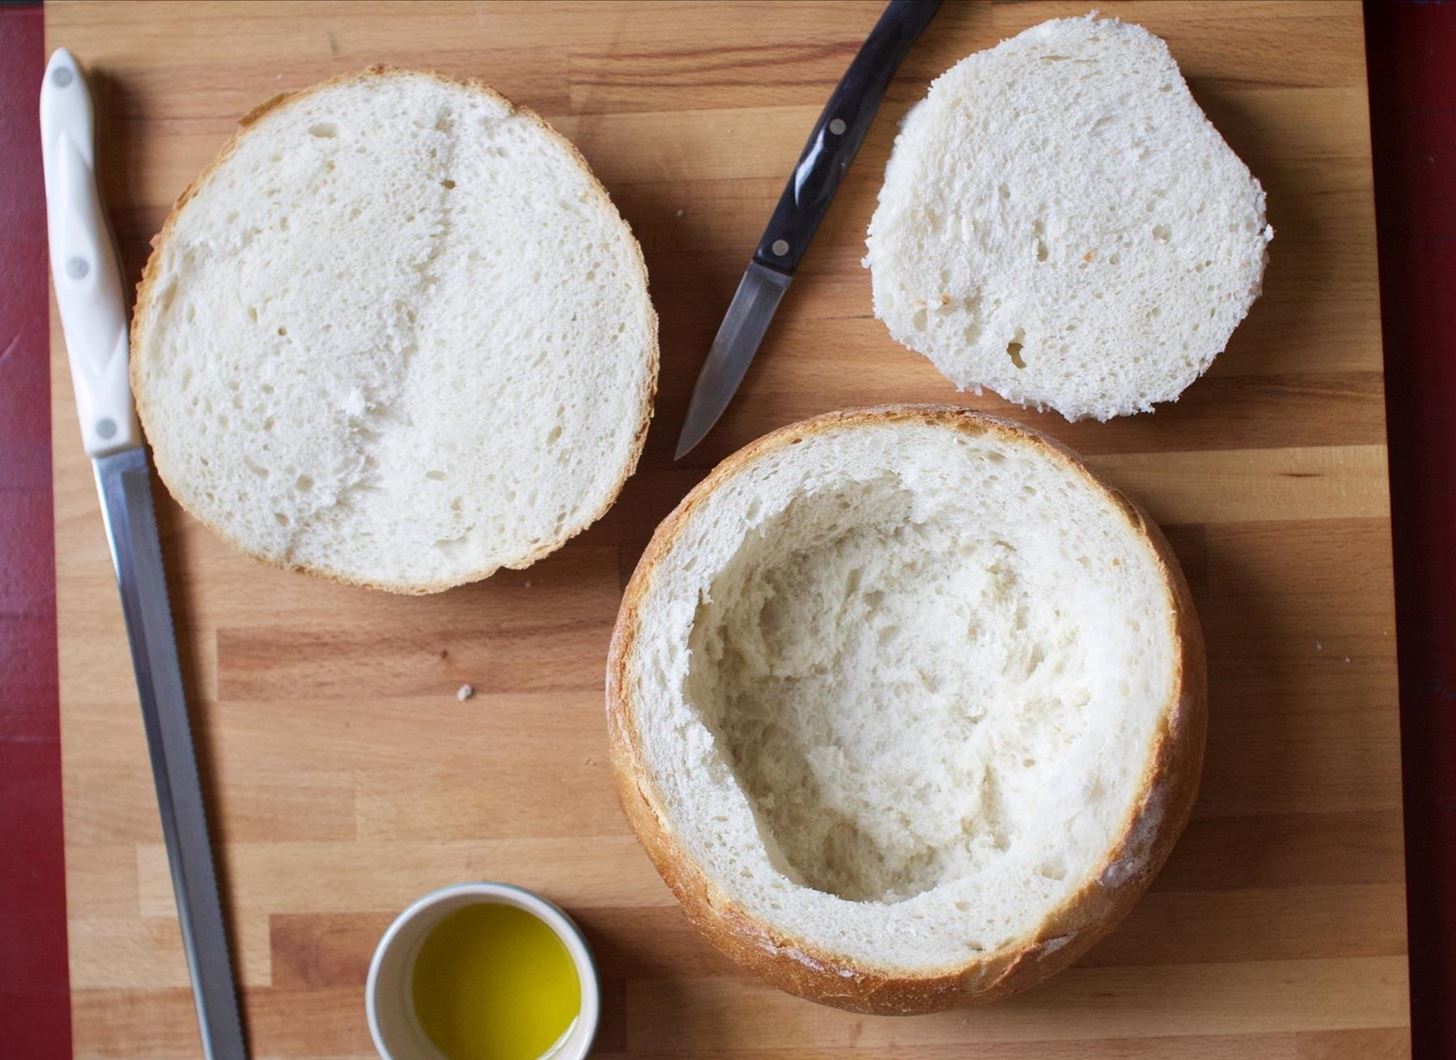 Transform a Loaf of Bread into a Stuffed Sandwich Fit for a Picnic